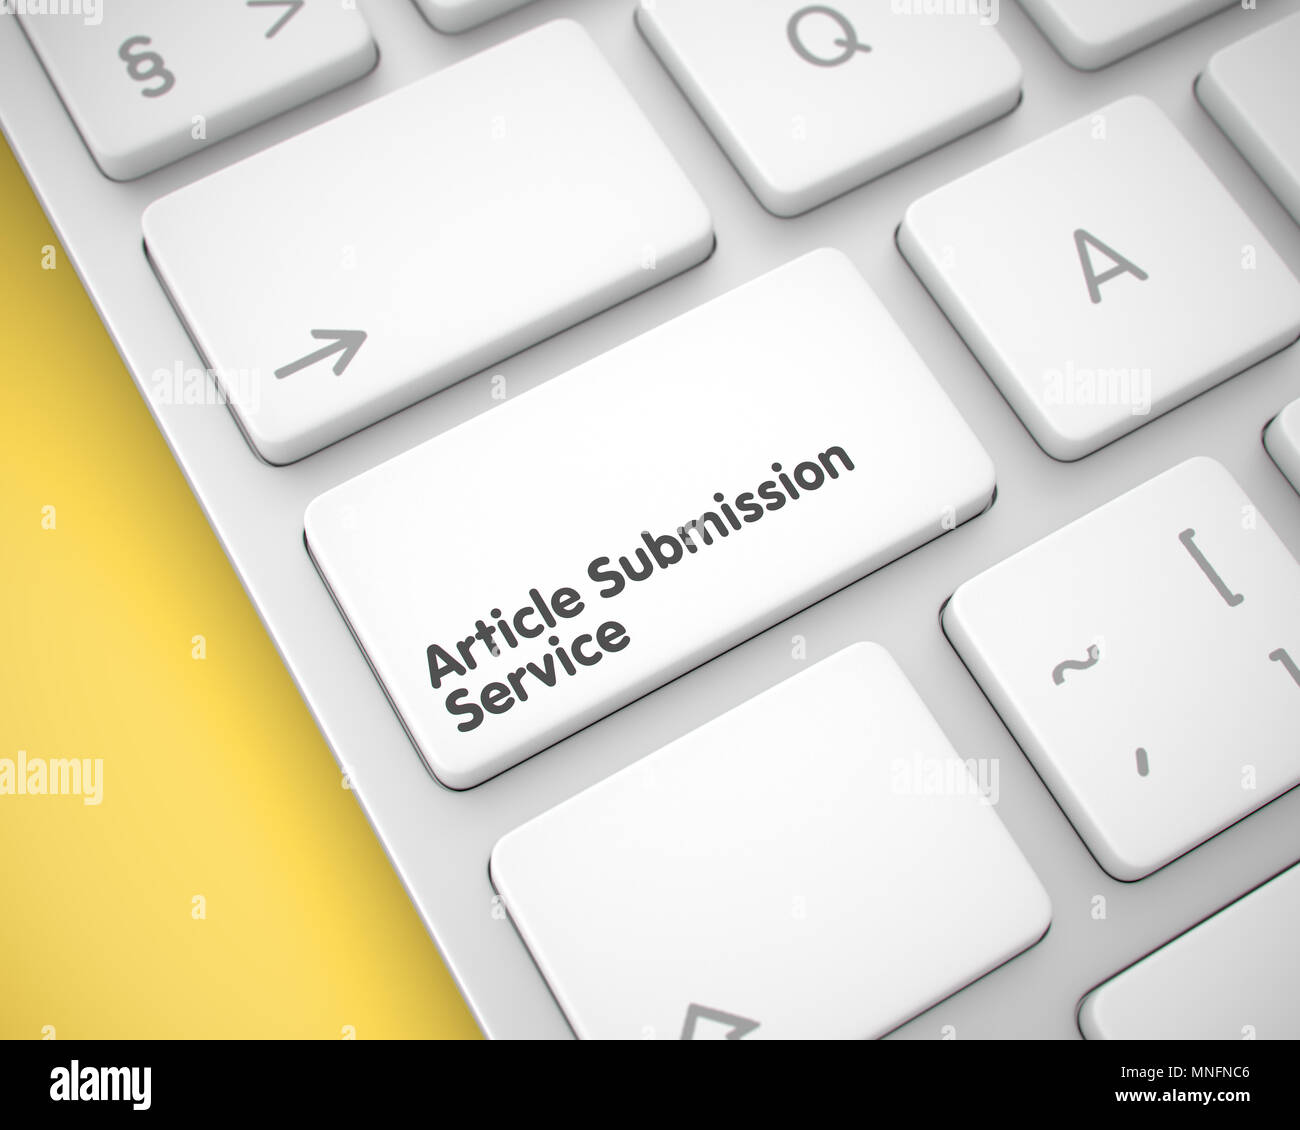 Article Submission Service on the White Keyboard Key. 3d Stock Photo